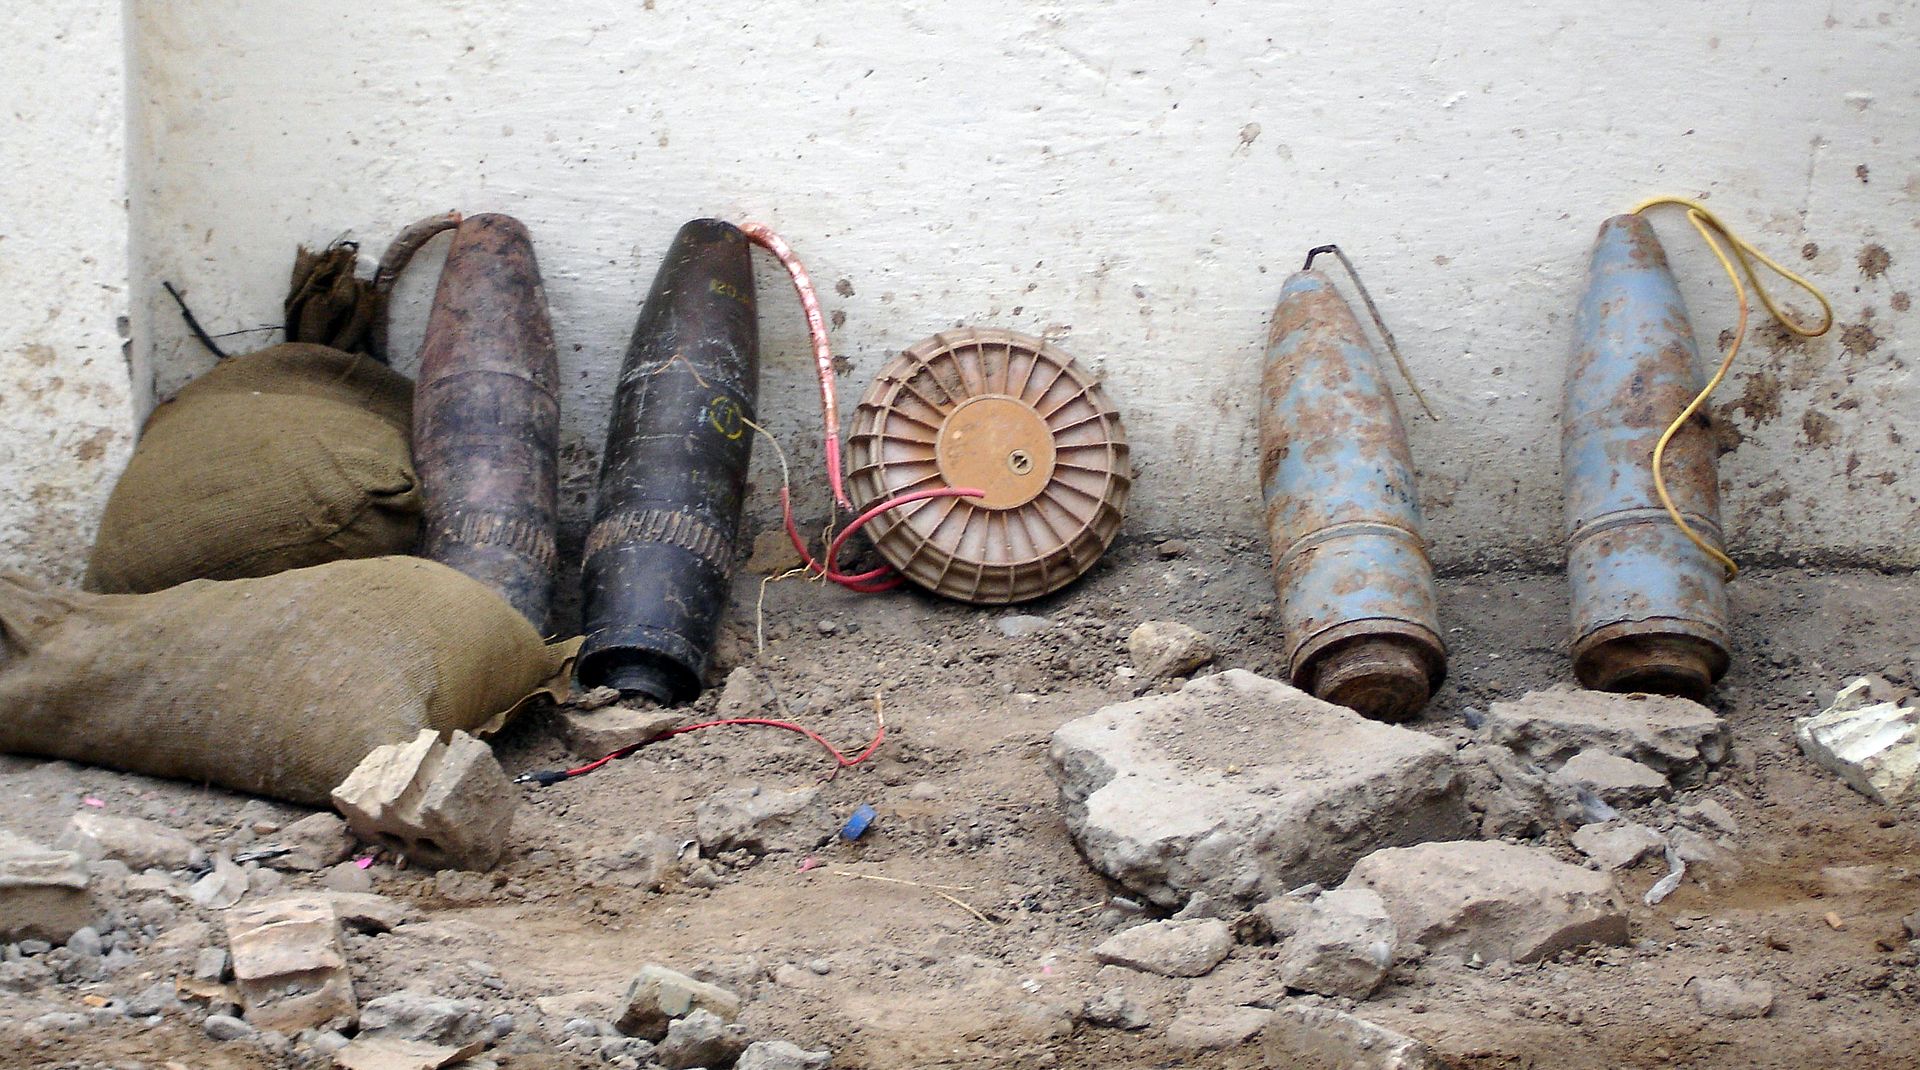 IED_Baghdad_from_munitions.jpg